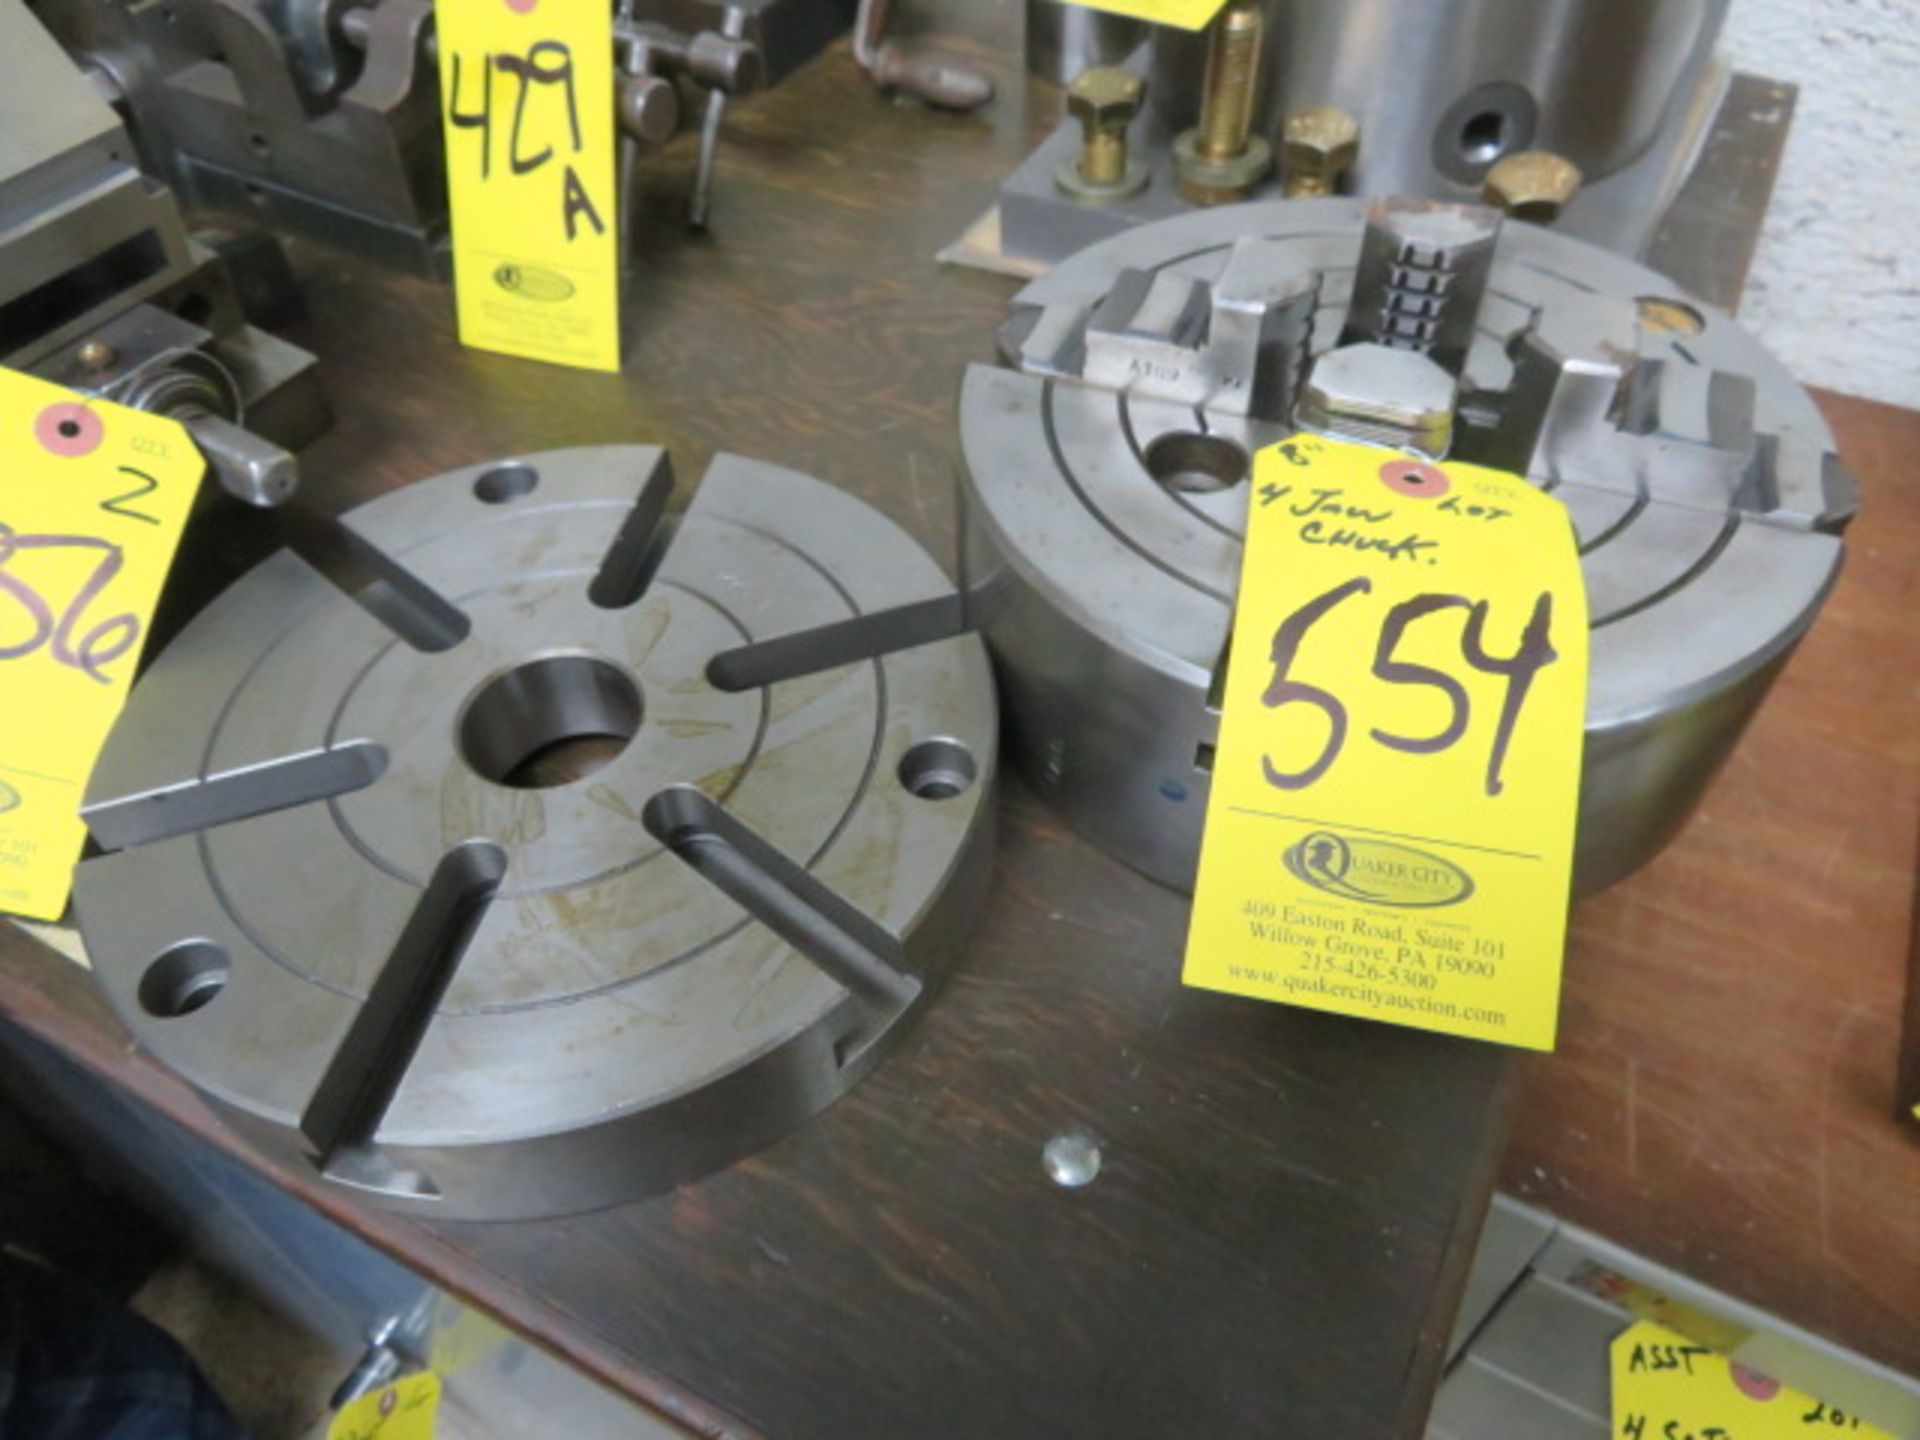 ROHM 8" 4-JAW CHUCK AND 8" FACE PLATE